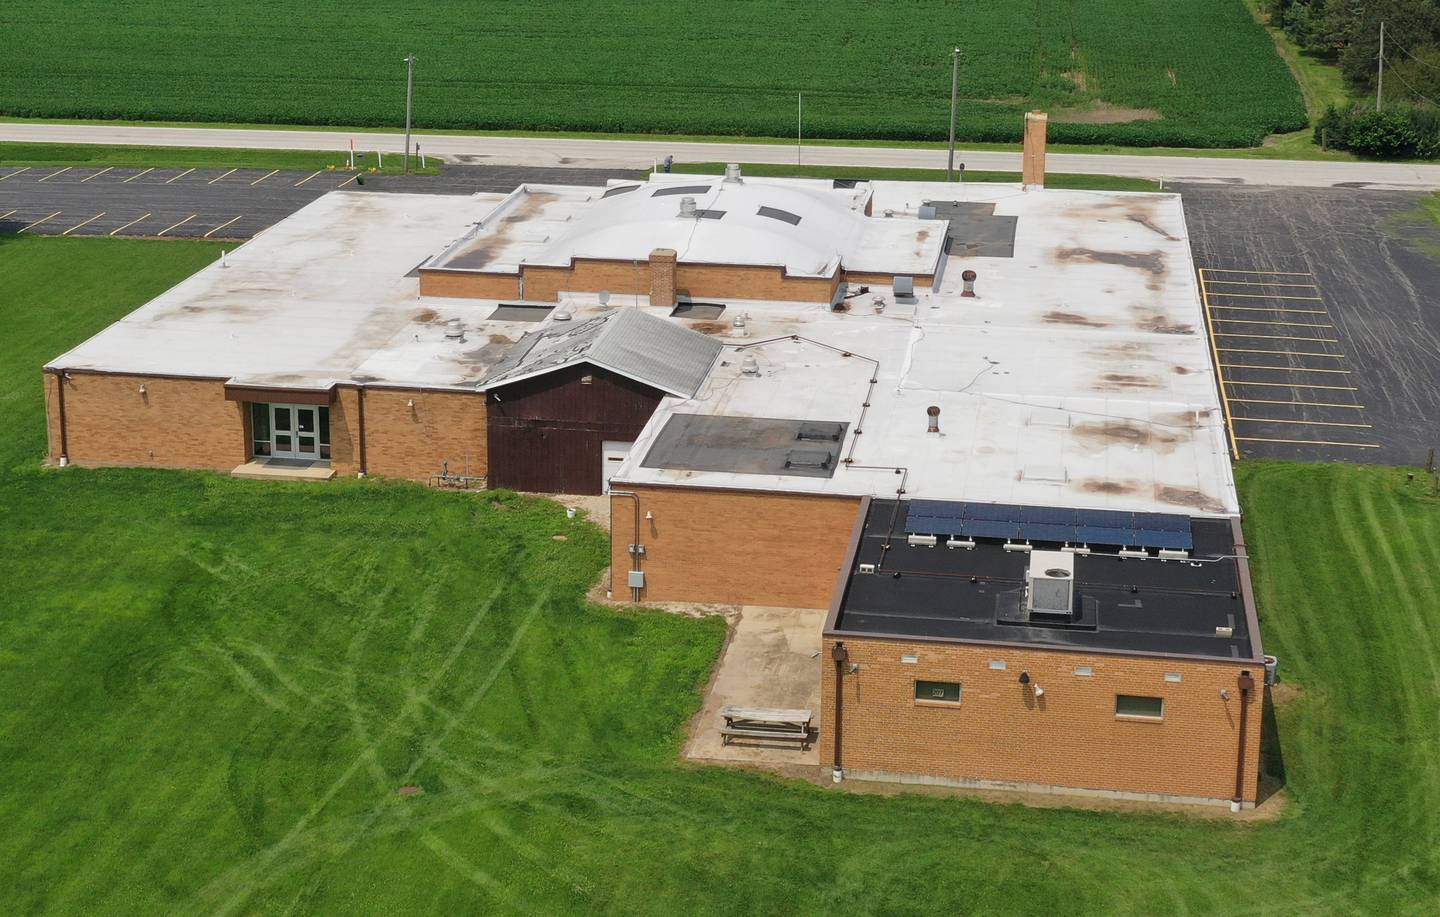 The rear of the former Waltham North School building located on 33rd Road north of Utica, will be demolished soon. The school is currently vacant and ready for tearing down as of Tuesday July 20, 2021.